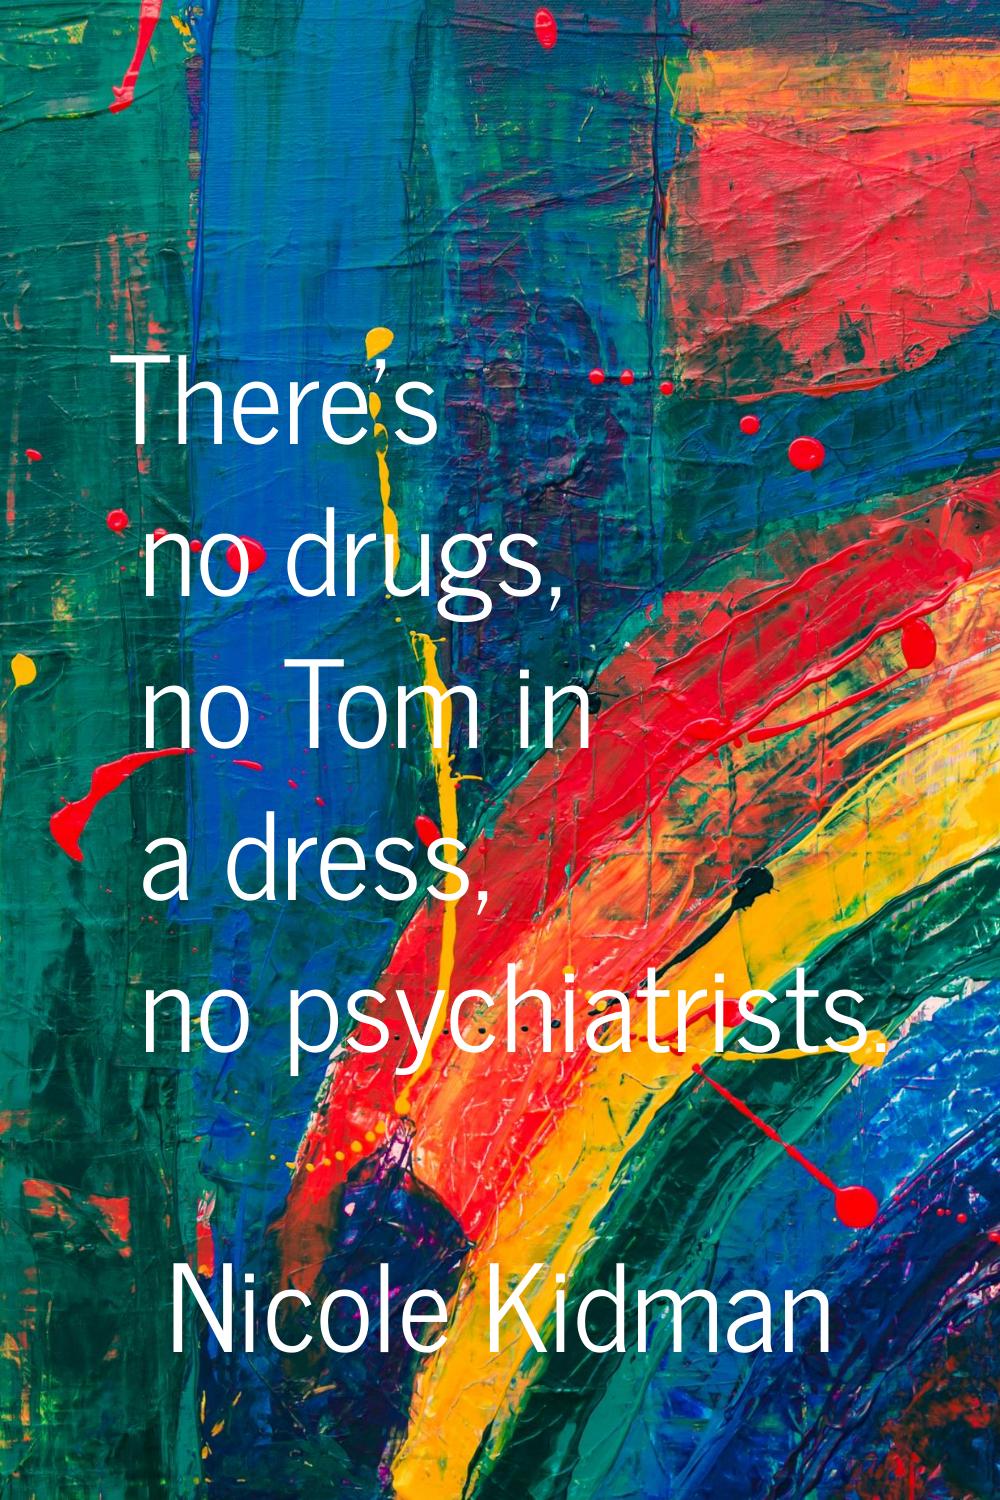 There's no drugs, no Tom in a dress, no psychiatrists.